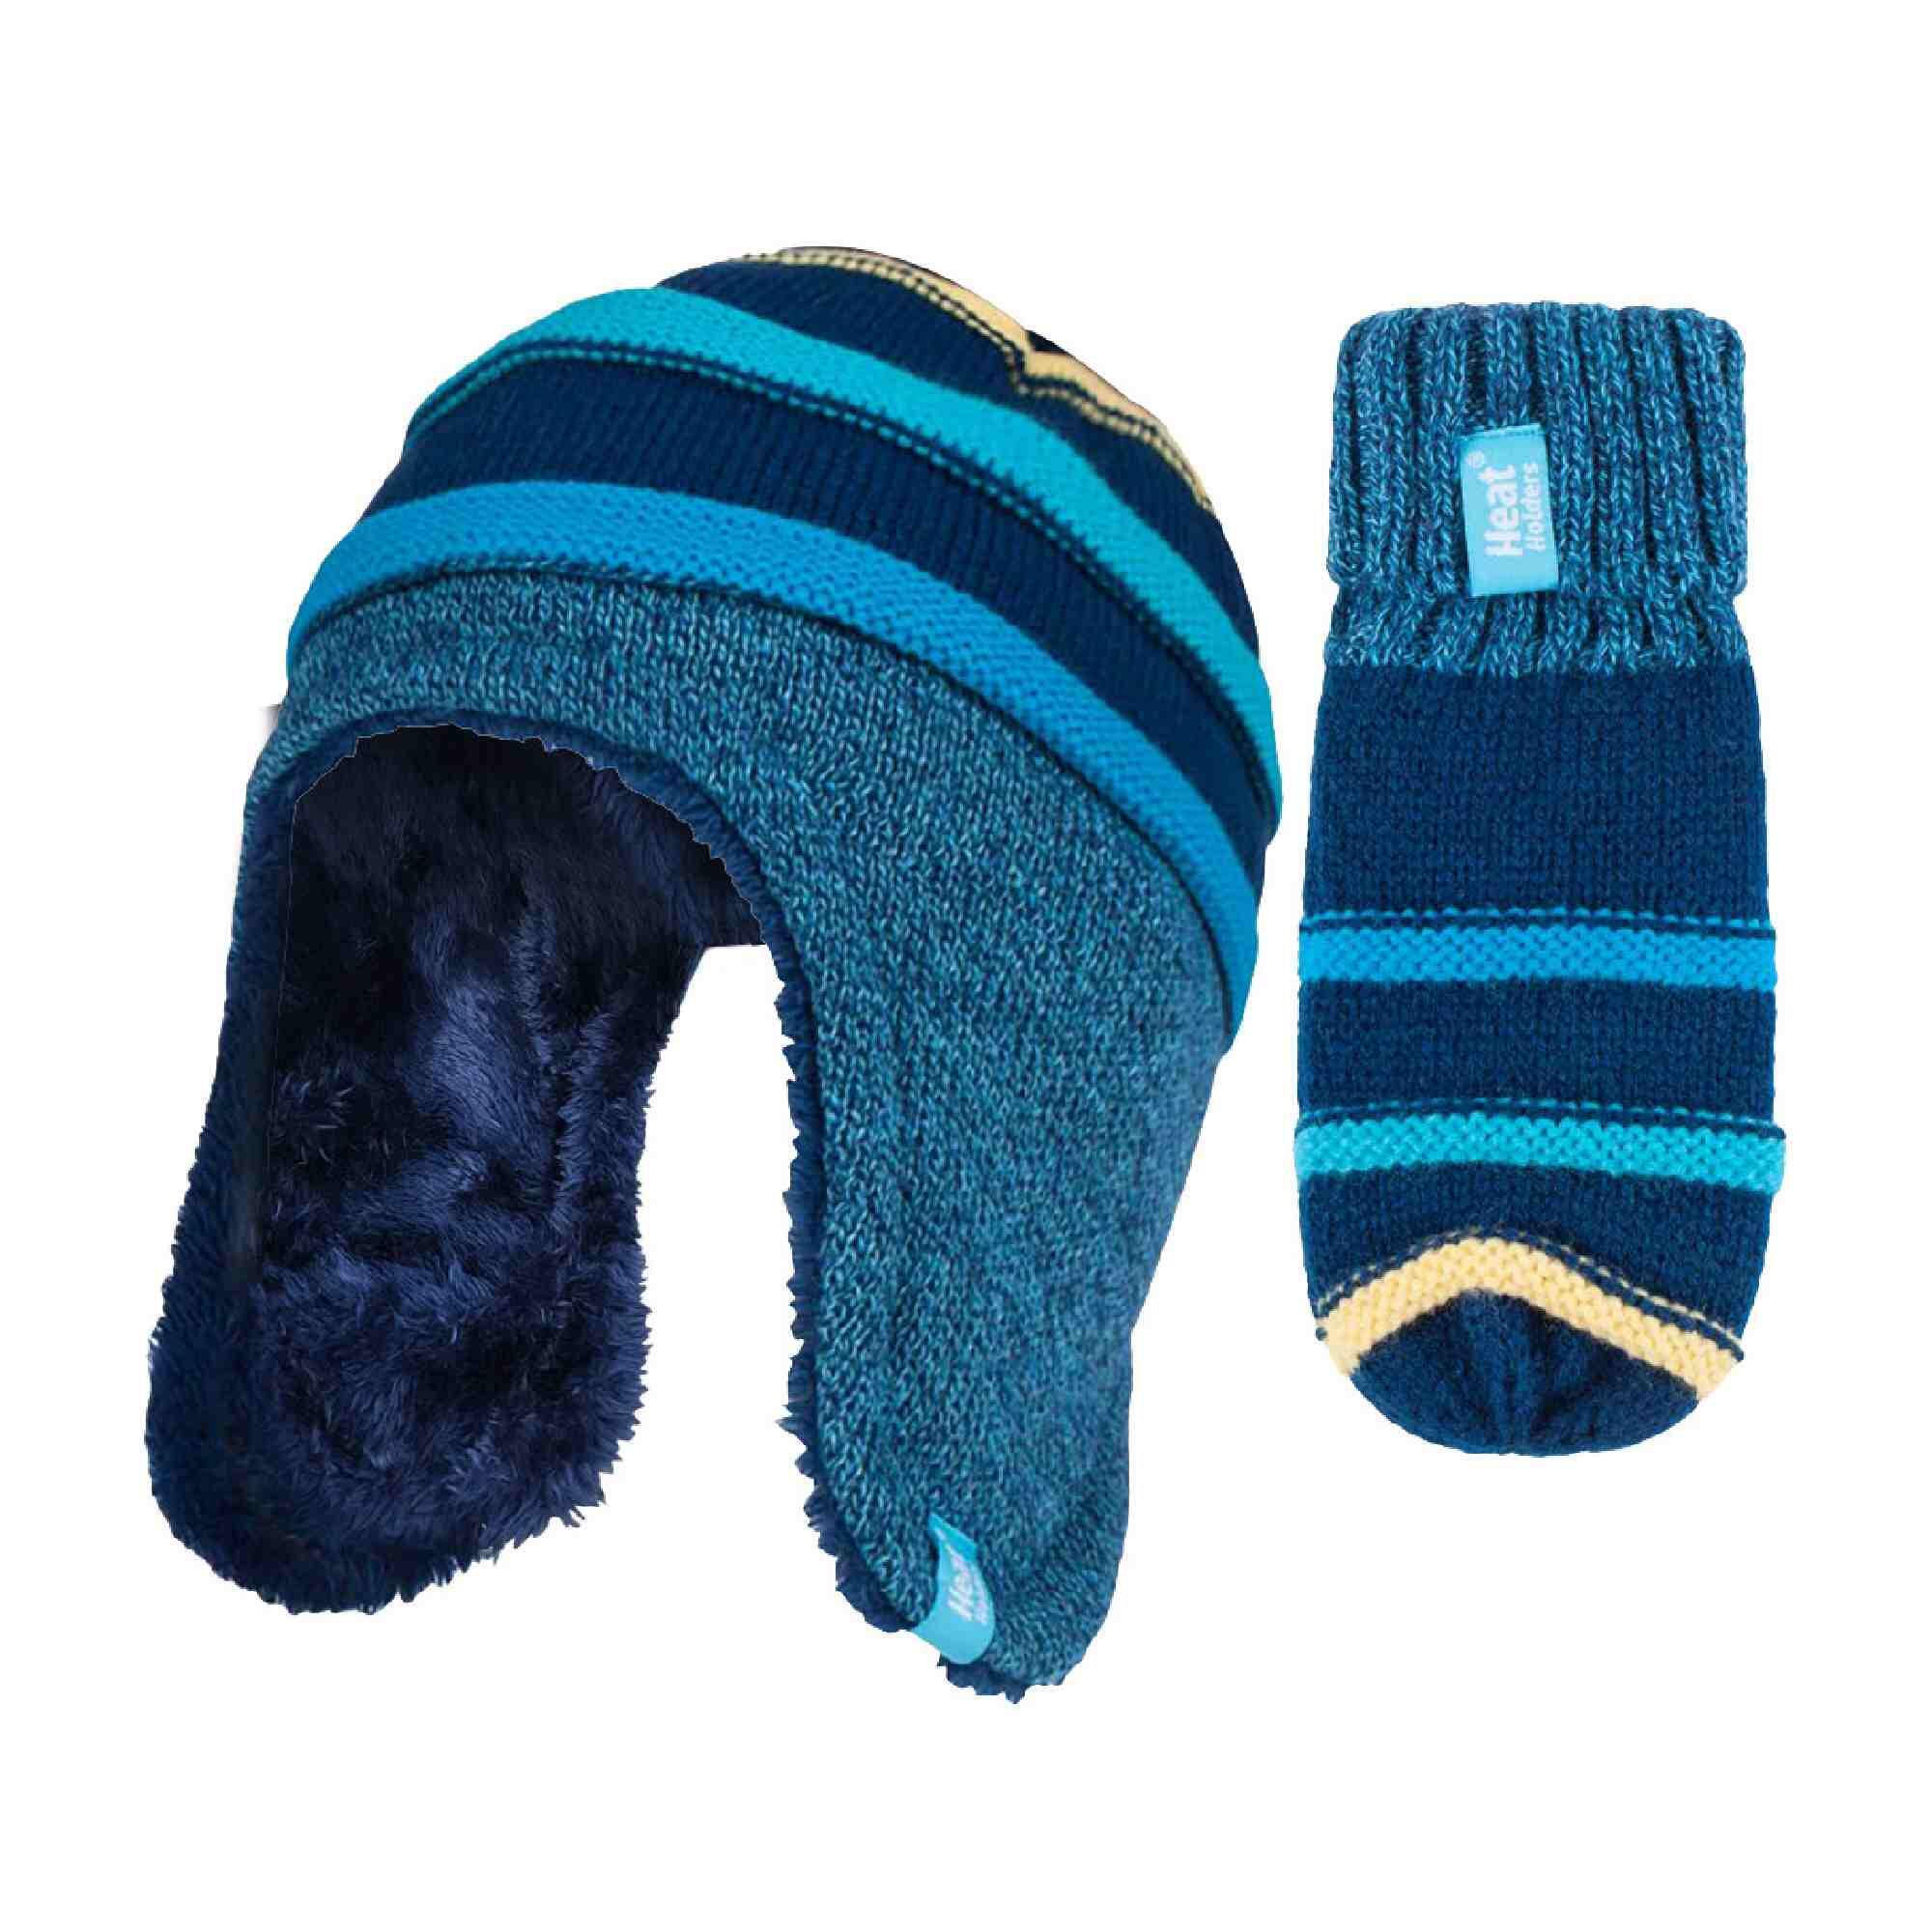 HEAT HOLDERS Childrens Winter Warm Fleece Lined Thermal Hat and Mittens Set with Ear Flaps